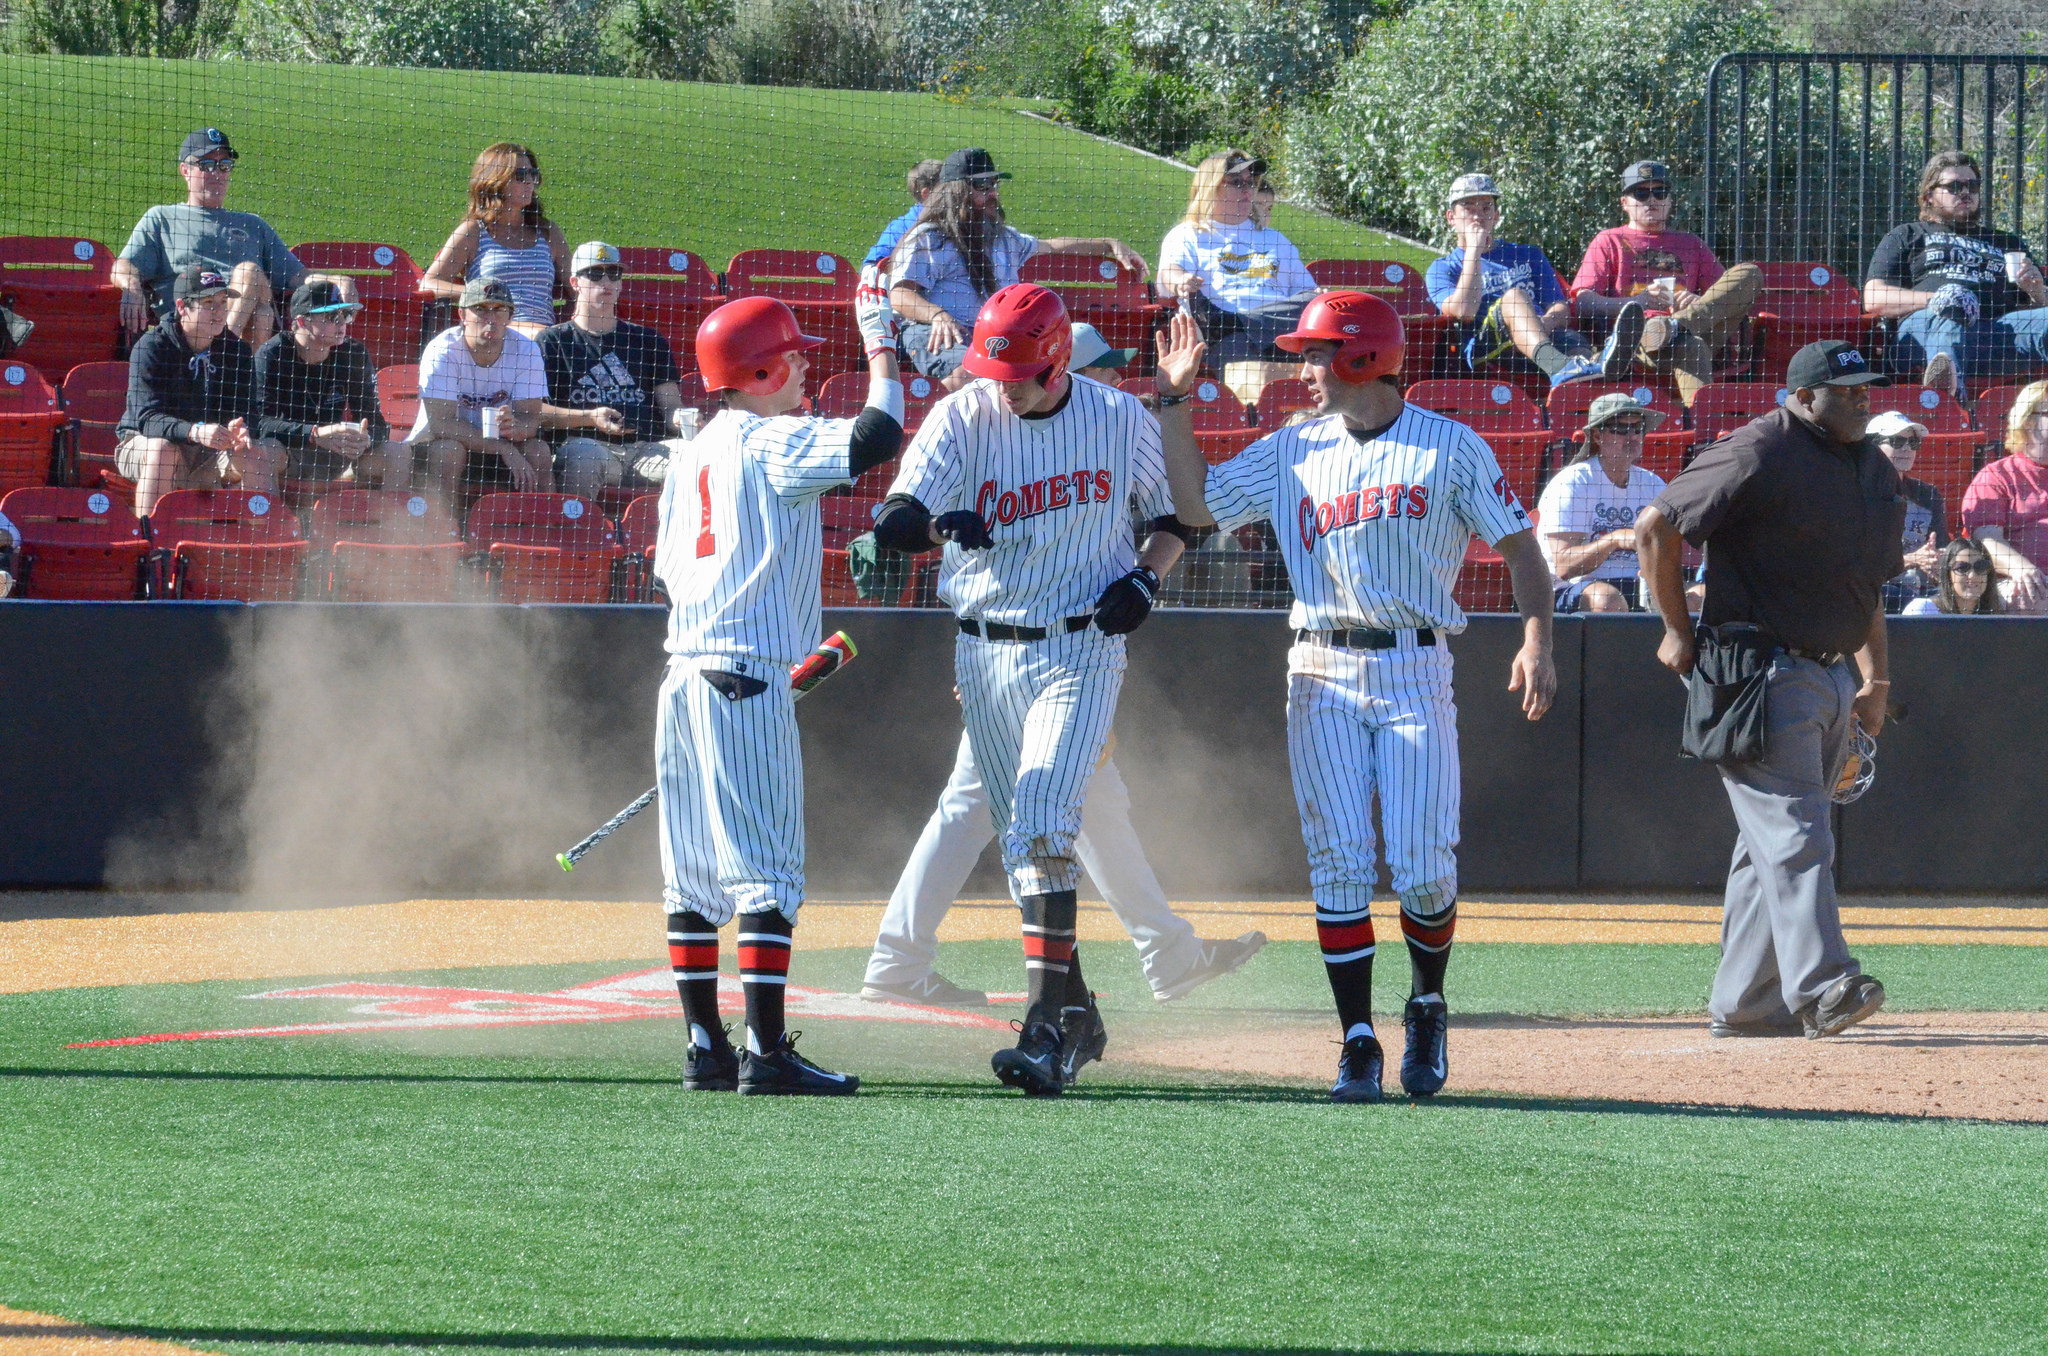 Gabe Willes (1) high fives his teammates after they scored back to back runs during the Jan. 28 game vs. Golden West. Palomar won 8-7.Tracy Grassel/The Telescope